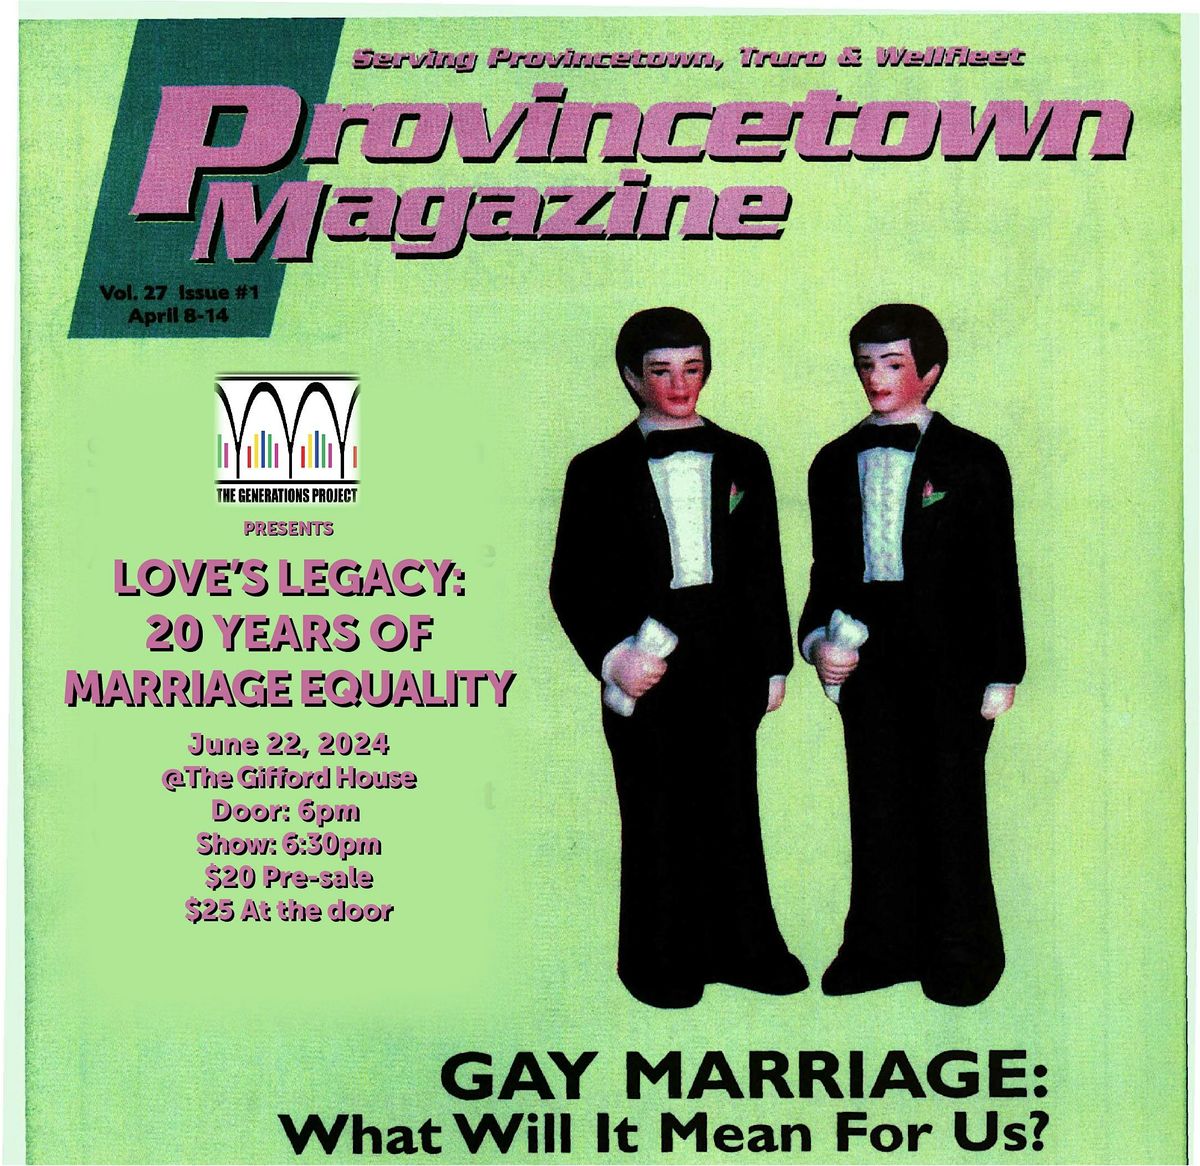 Love's Legacy: 20 Years of Marriage Equality